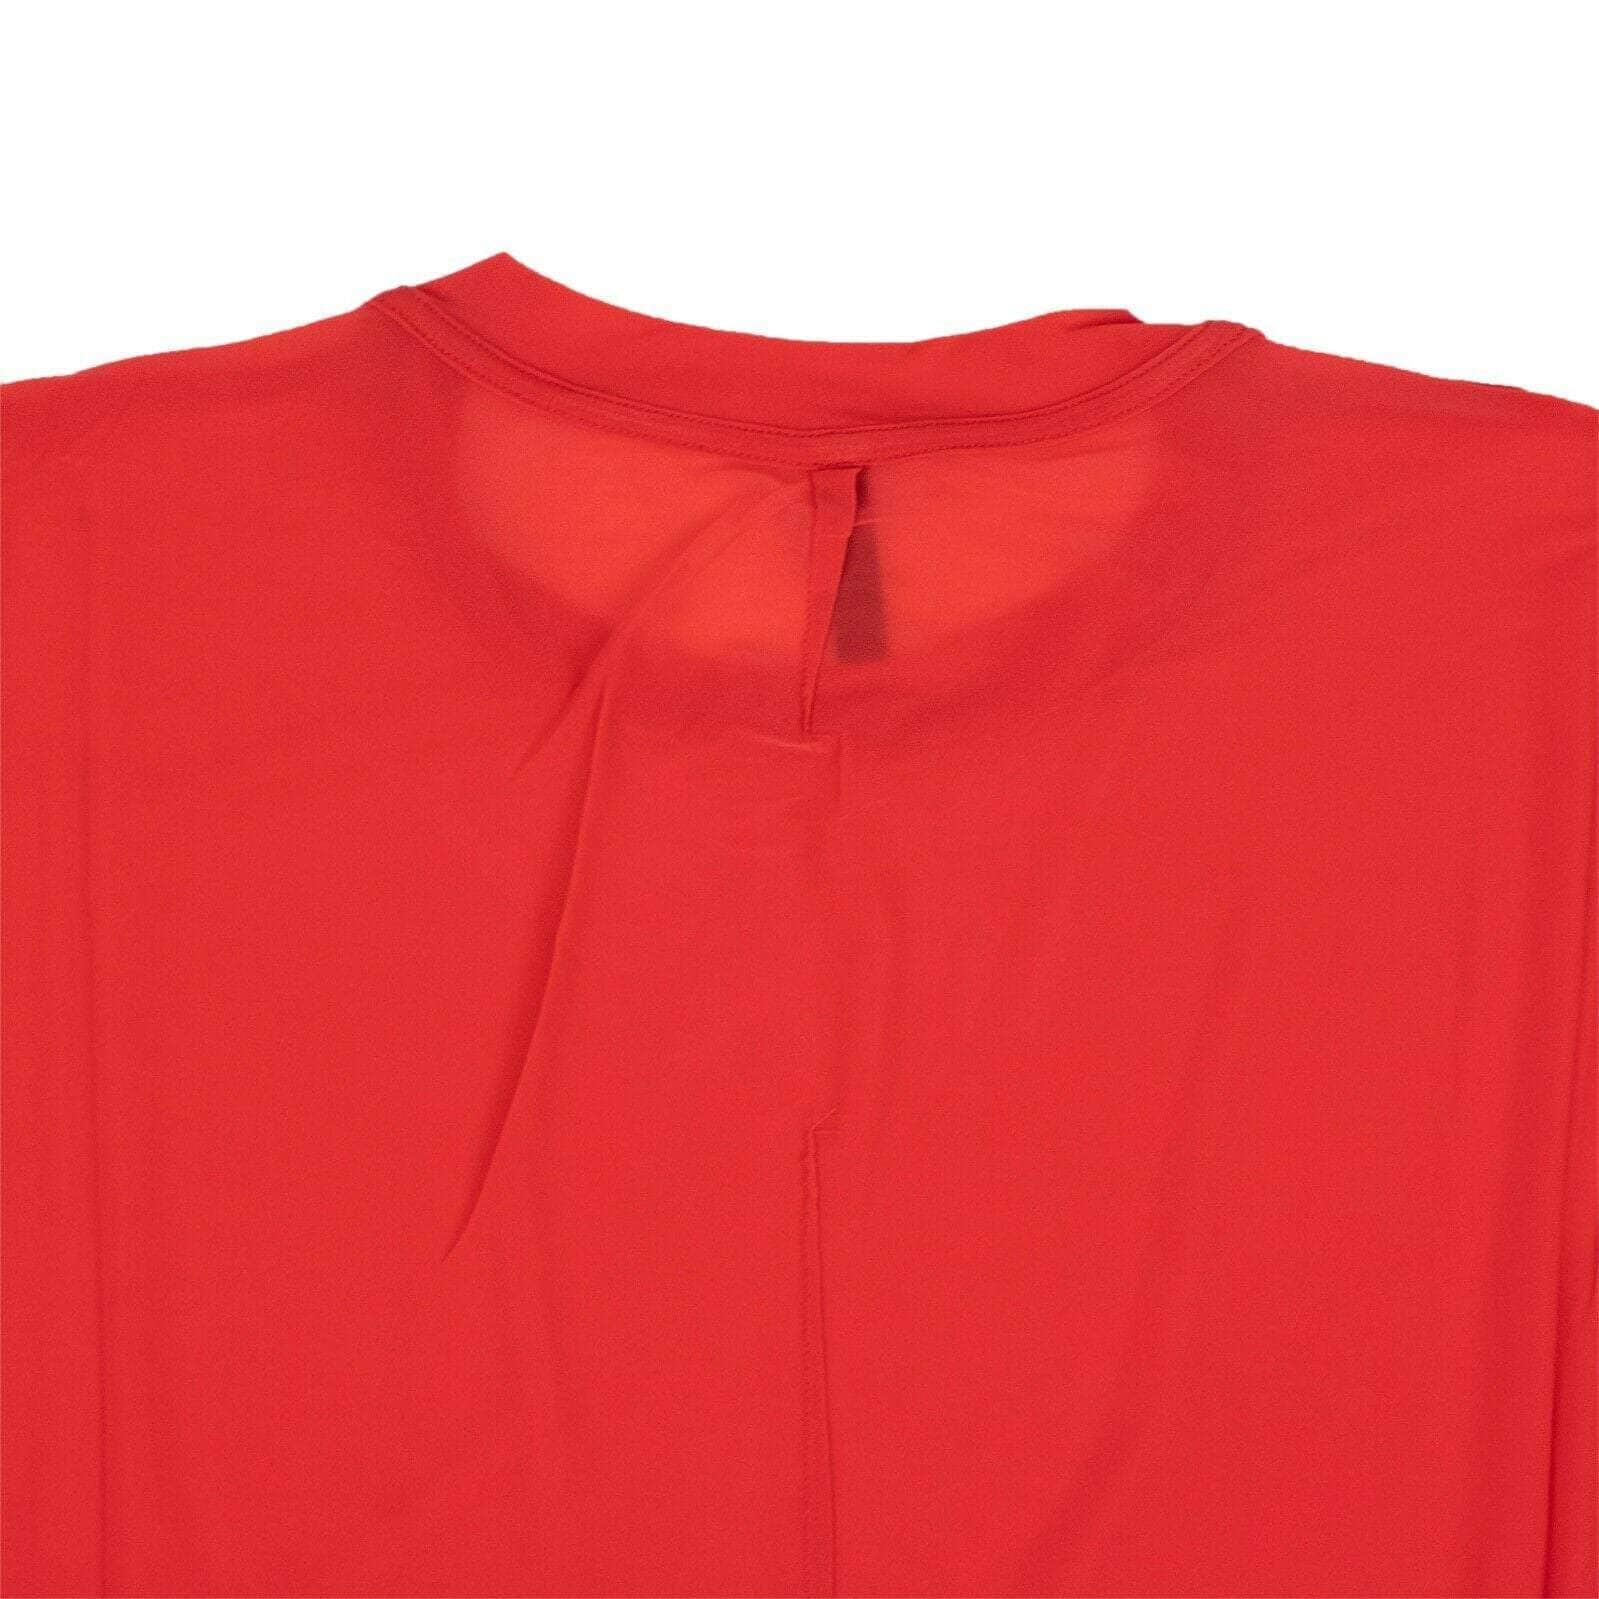 Unravel Project channelenable-all, chicmi, couponcollection, gender-mens, main-clothing, size-s, under-250, unravel-project S Red Stocking Reverse Skate T-Shirt 74NGG-UN-1076/S 74NGG-UN-1076/S